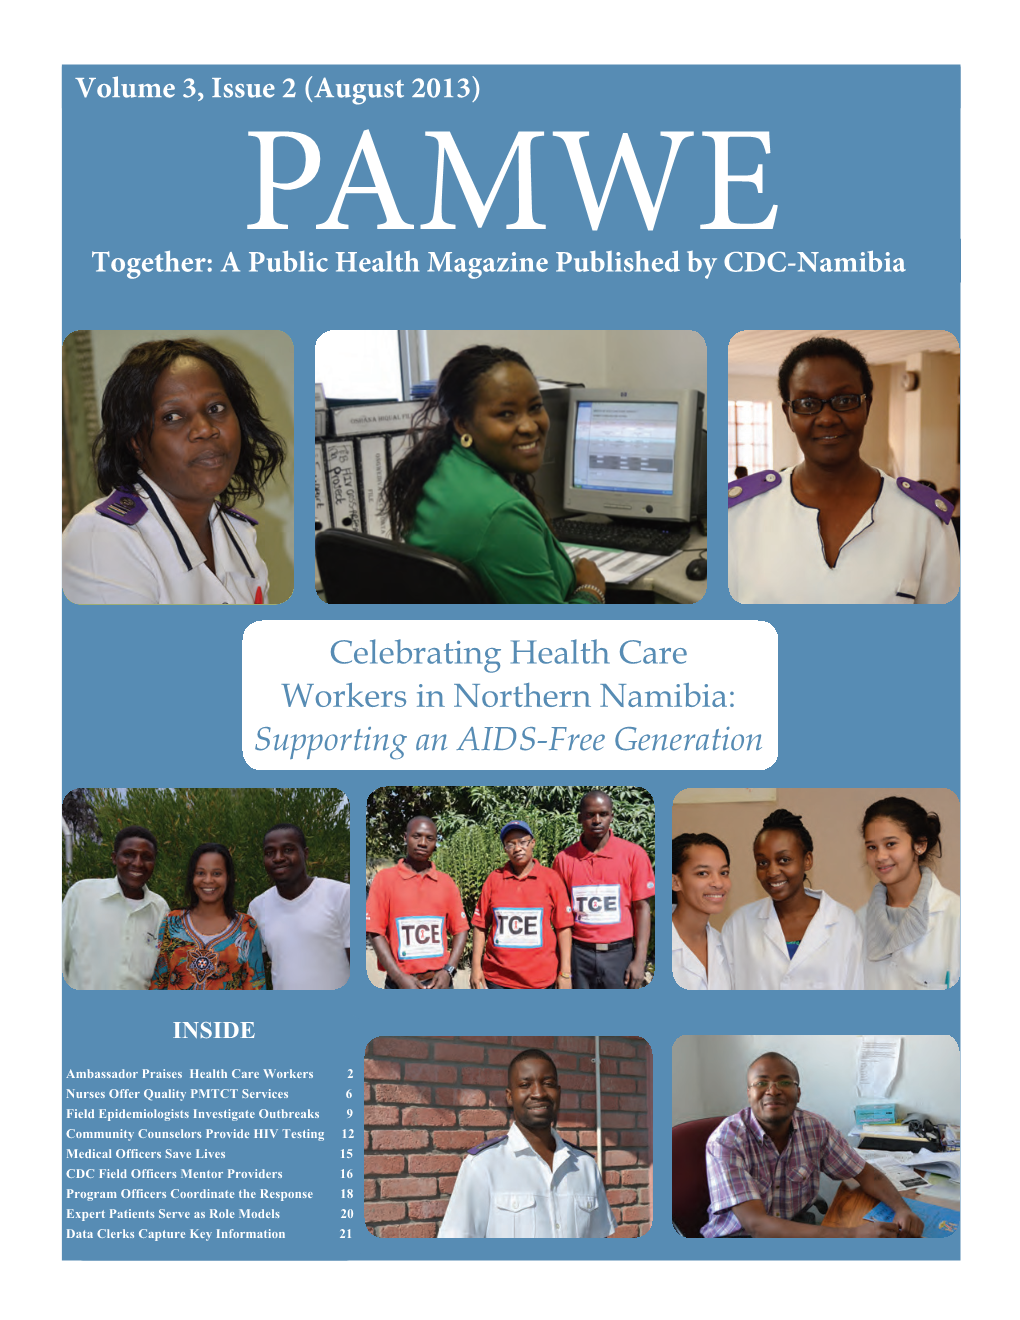 Celebrating Health Care Workers in Northern Namibia: Supporting an AIDS-Free Generation